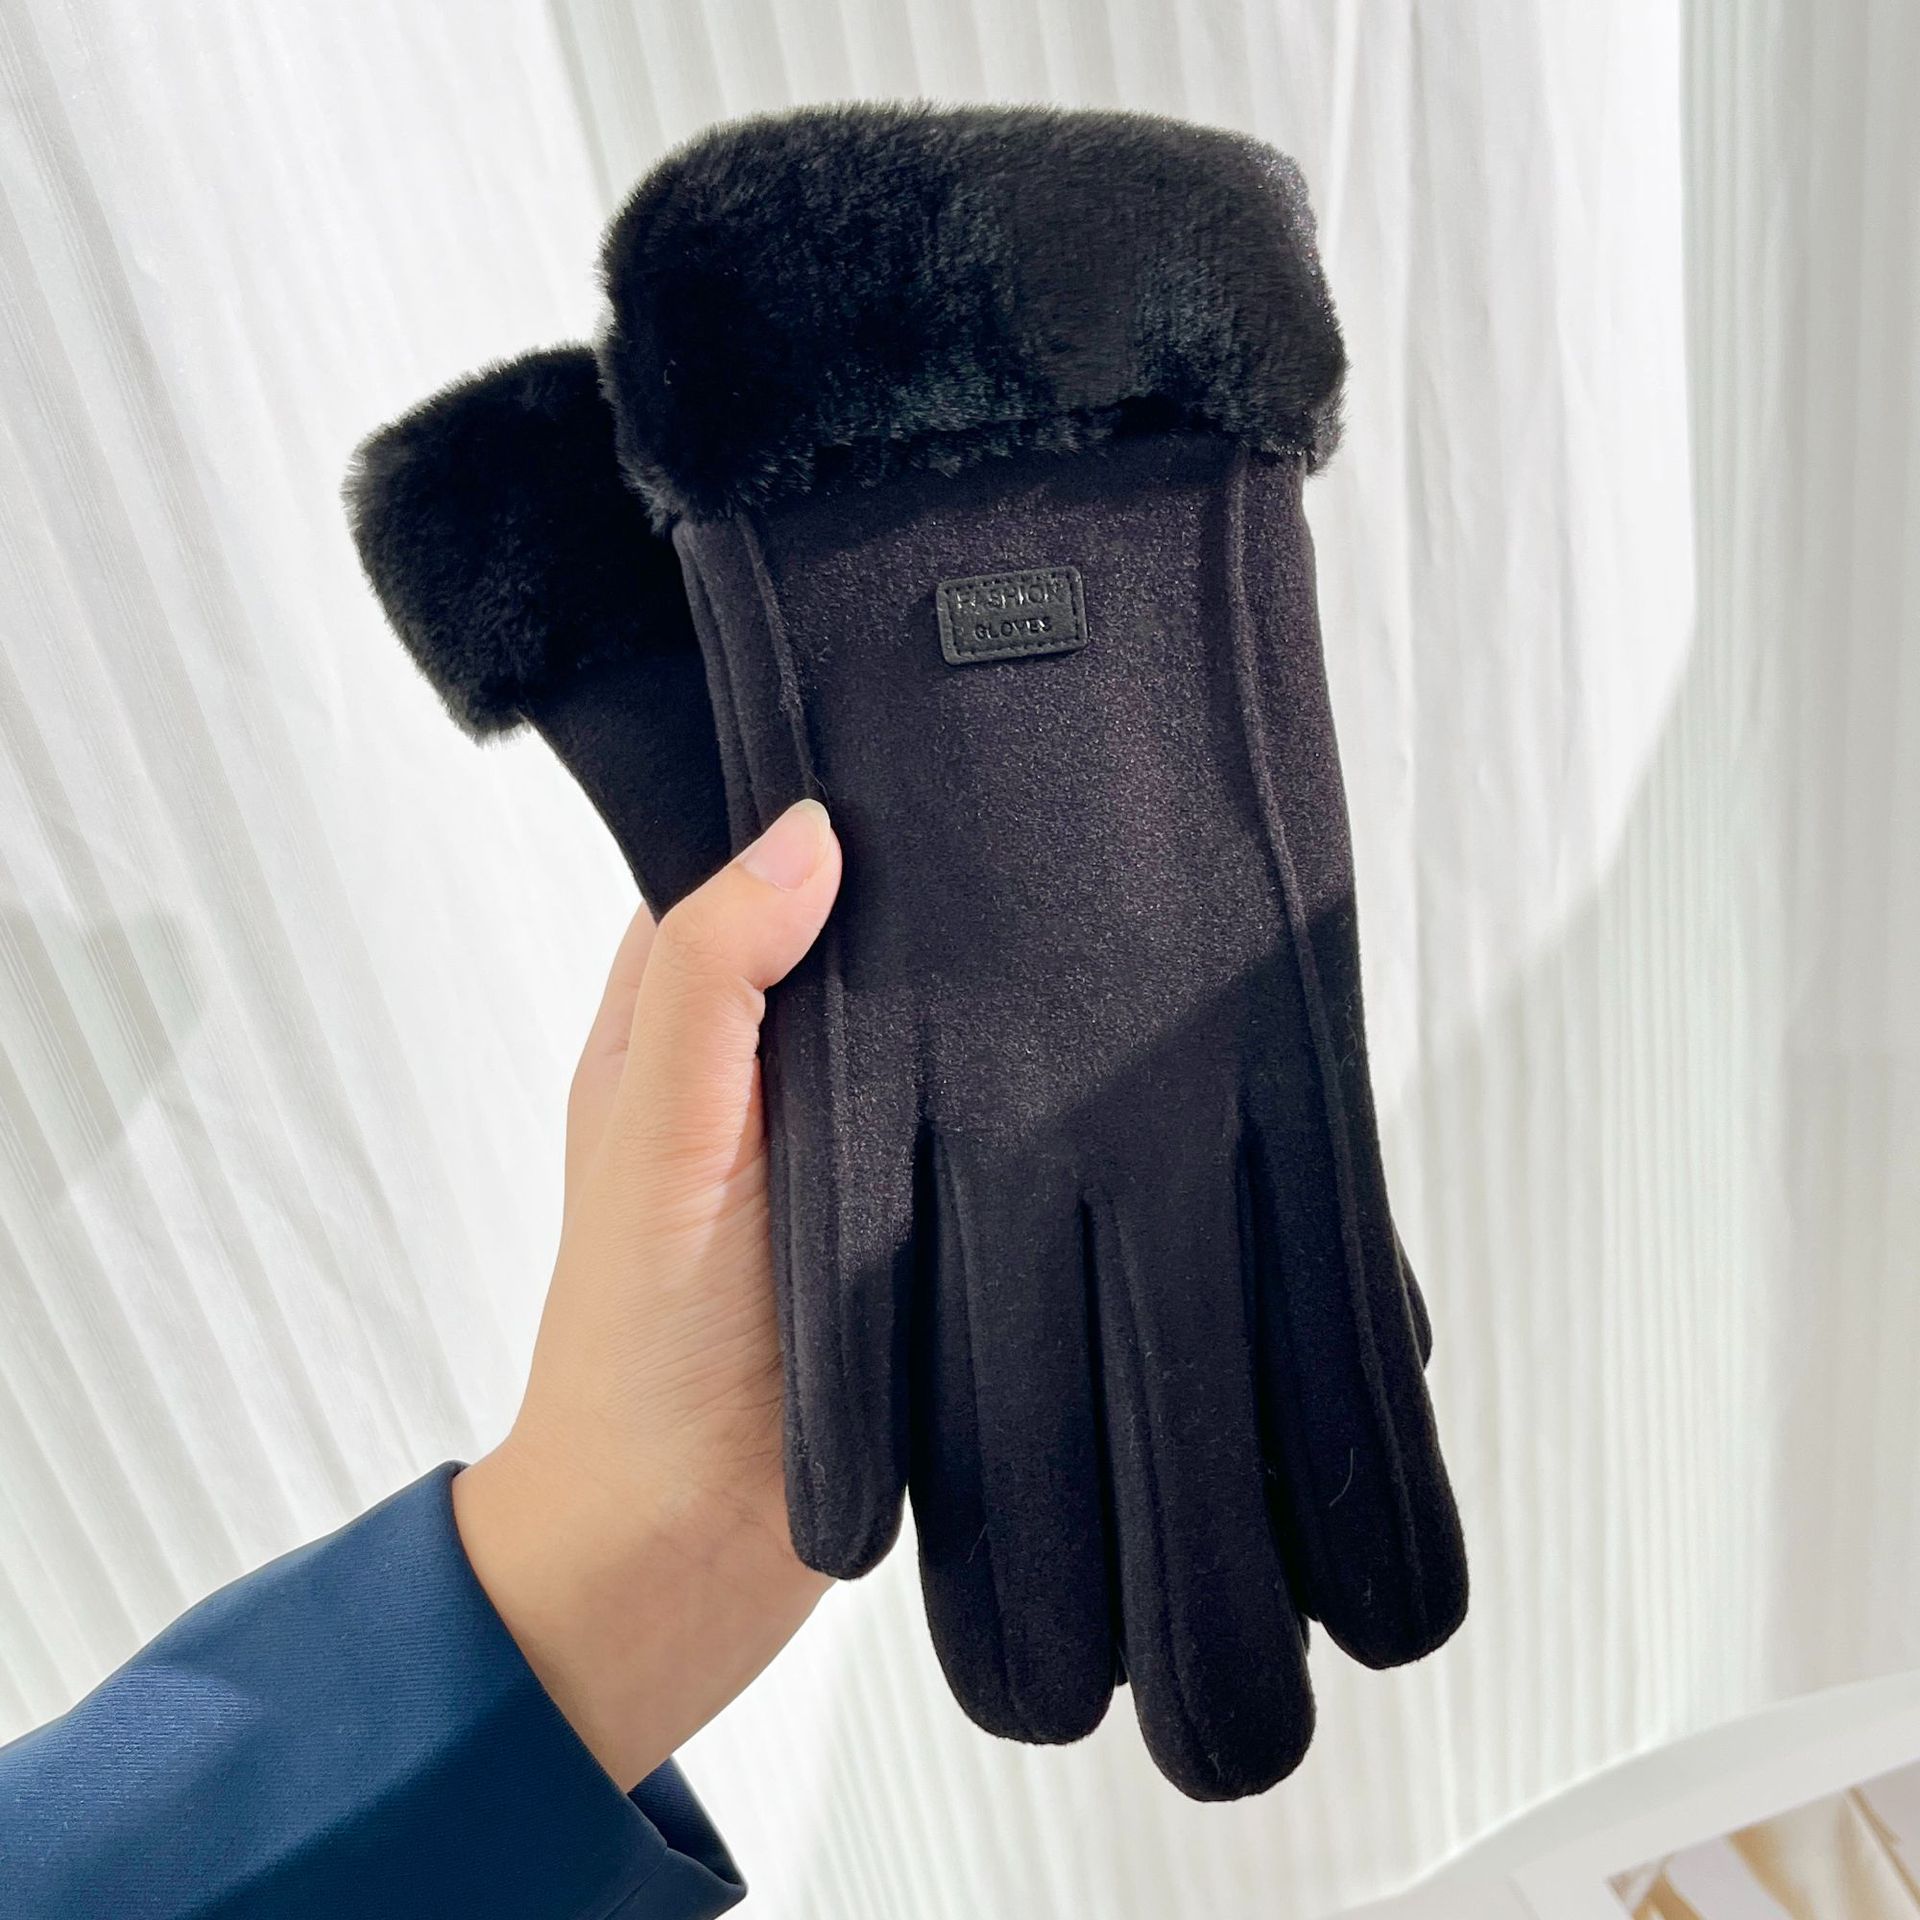 Women's Winter Gloves Fleece Lined Padded Warm Keeping Cute Suede Women's Riding Cold-Proof Windproof Cycling Touch Screen Winter